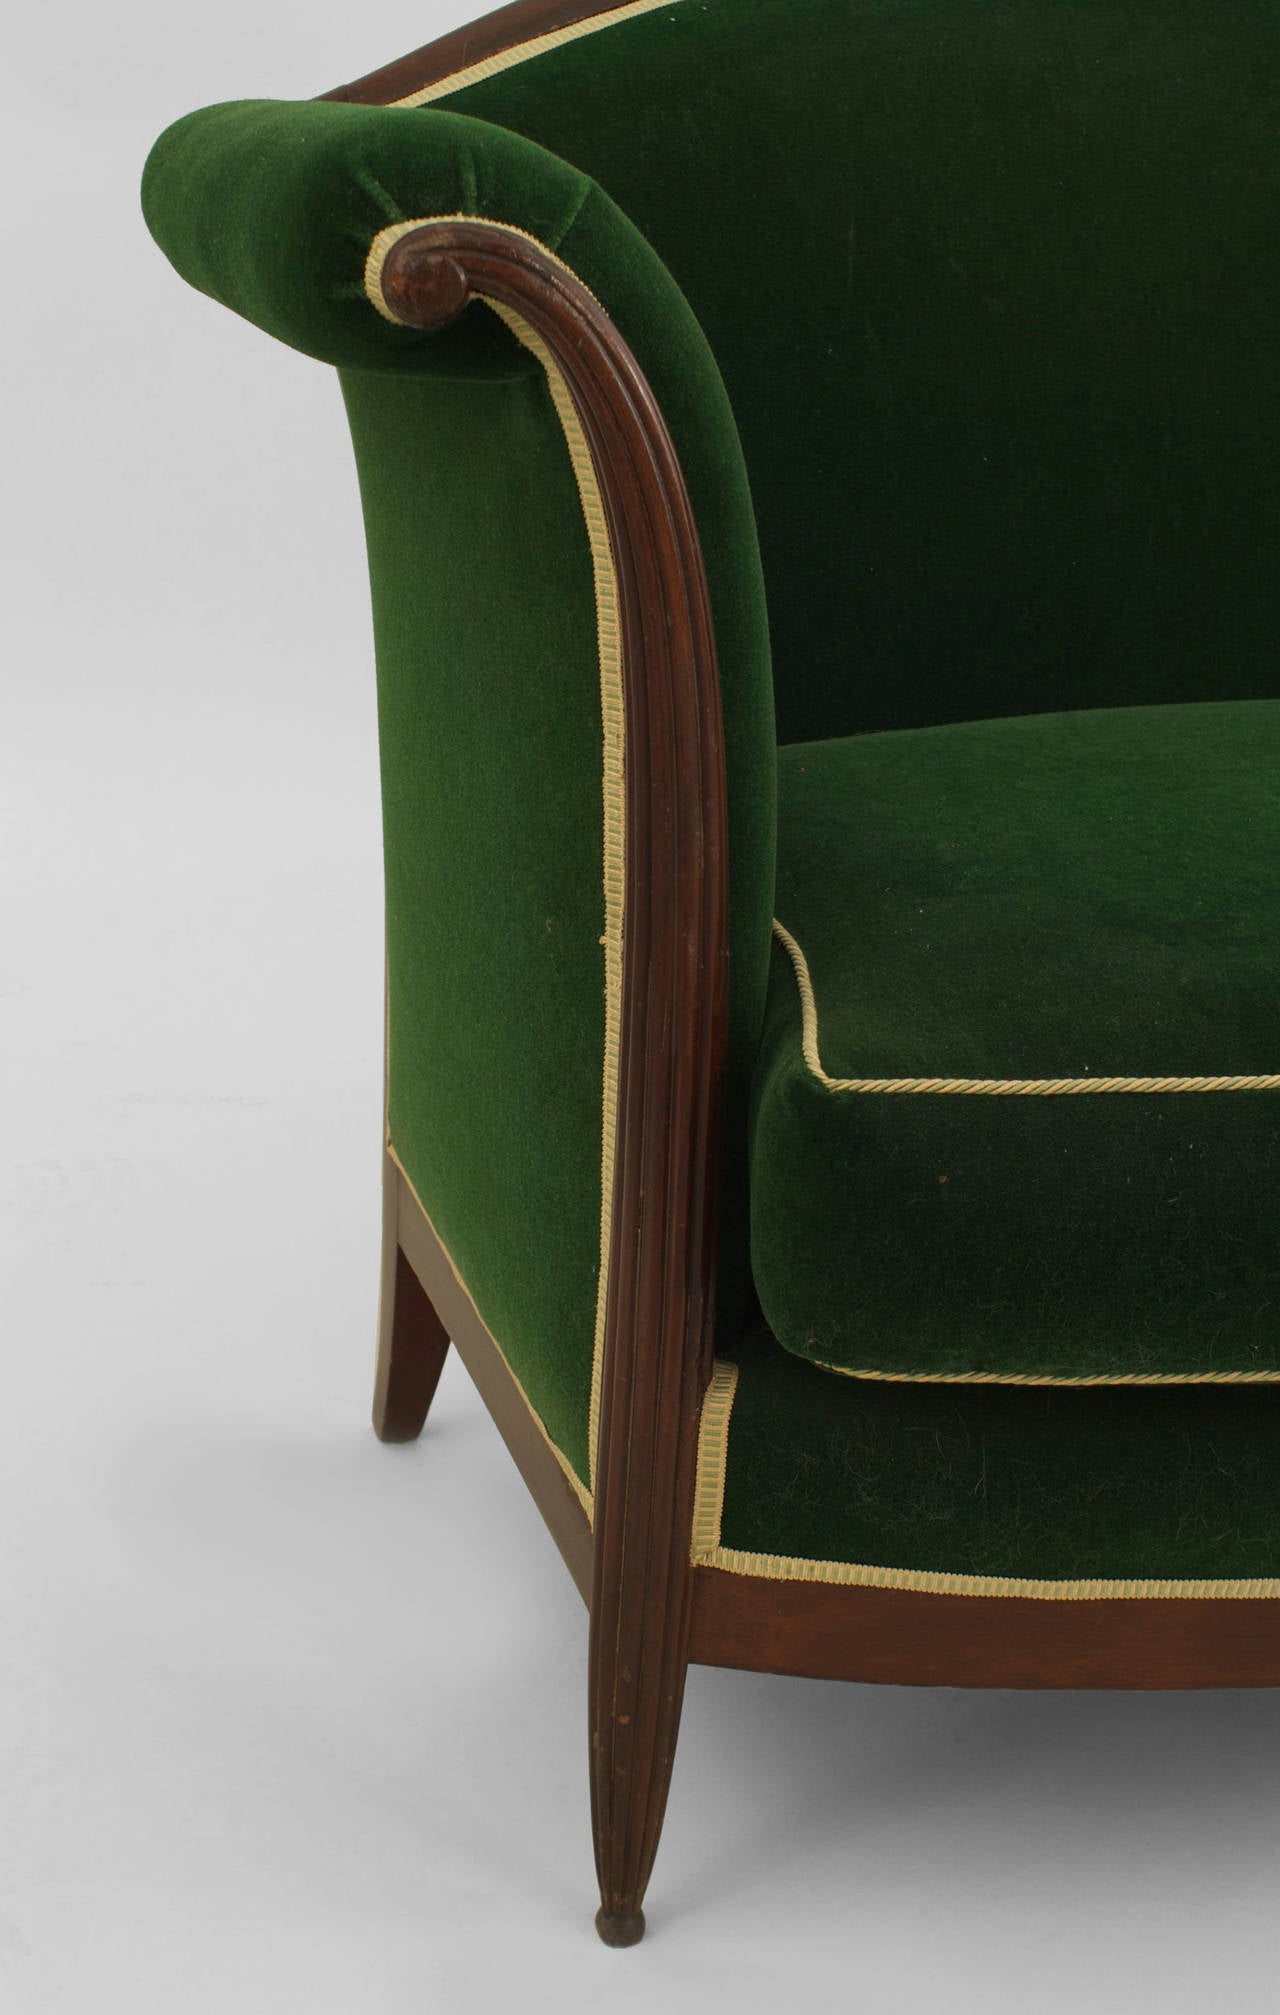 French Art Deco mahogany camel back loveseat with flaired form arms and fluted legs upholstered in green velvet with a seat cushion.
